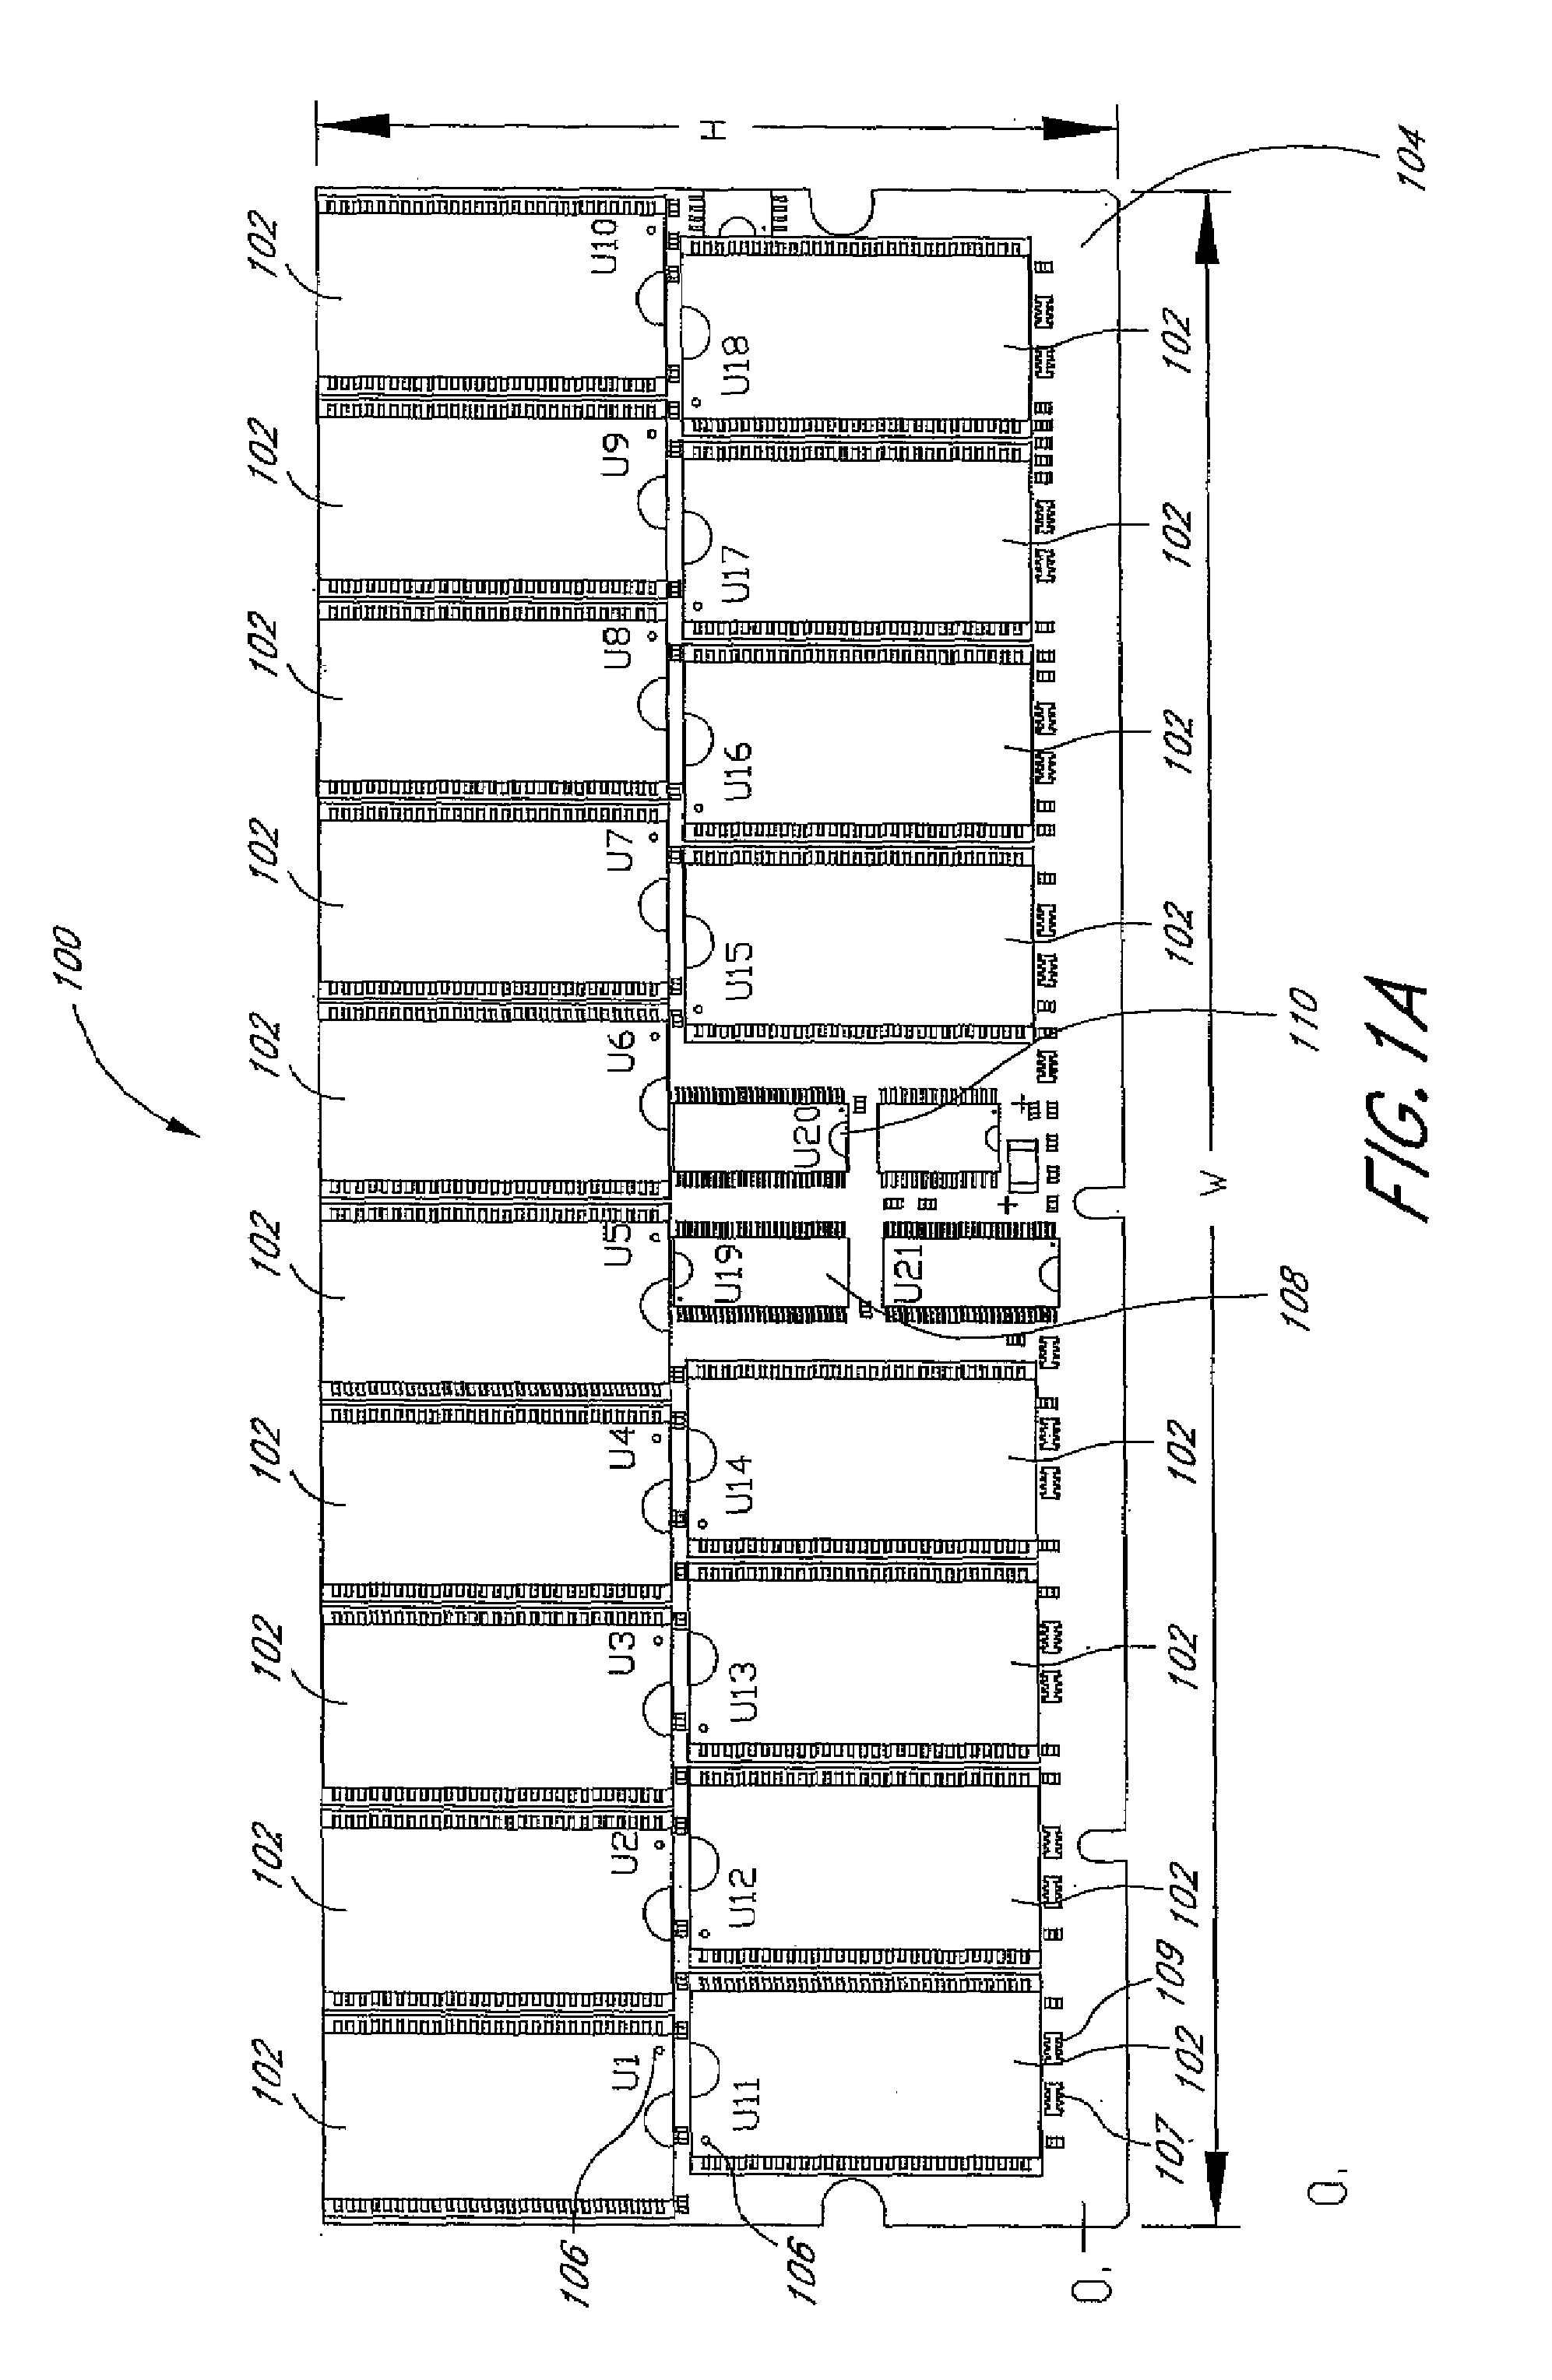 Arrangement of integrated circuits in a memory module